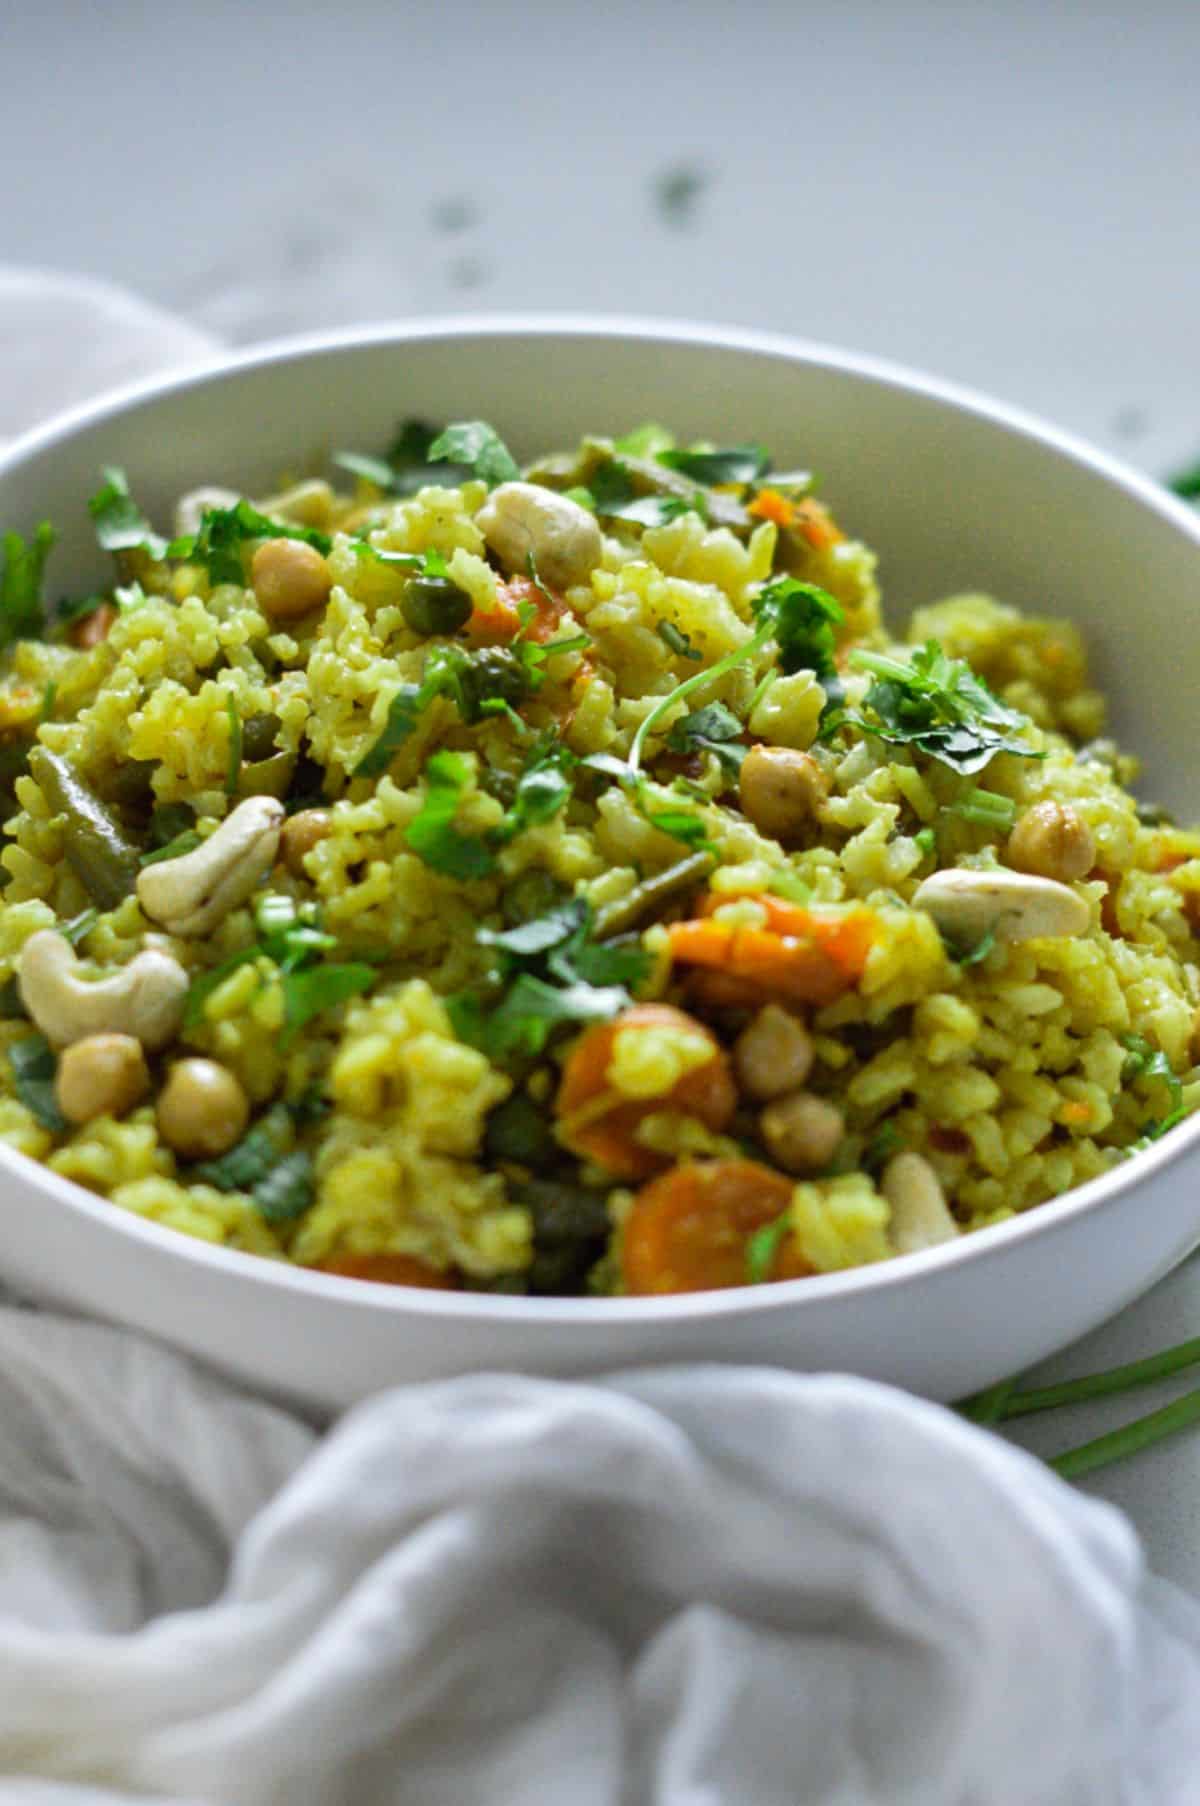 Brown Rice Masala Pilaf in a white bowl.